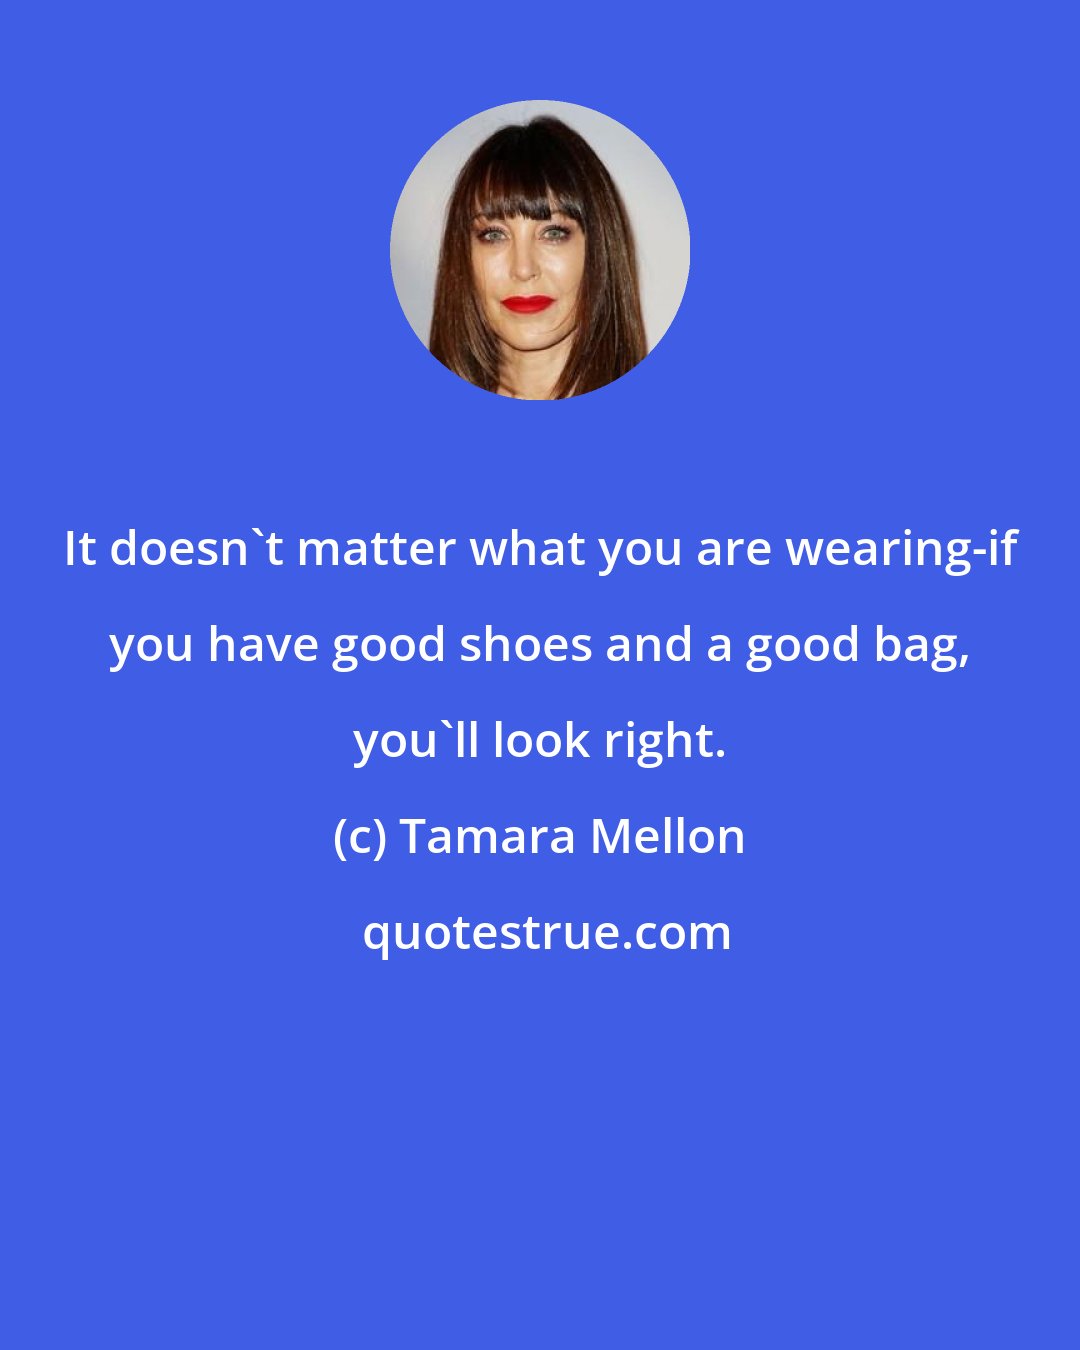 Tamara Mellon: It doesn't matter what you are wearing-if you have good shoes and a good bag, you'll look right.